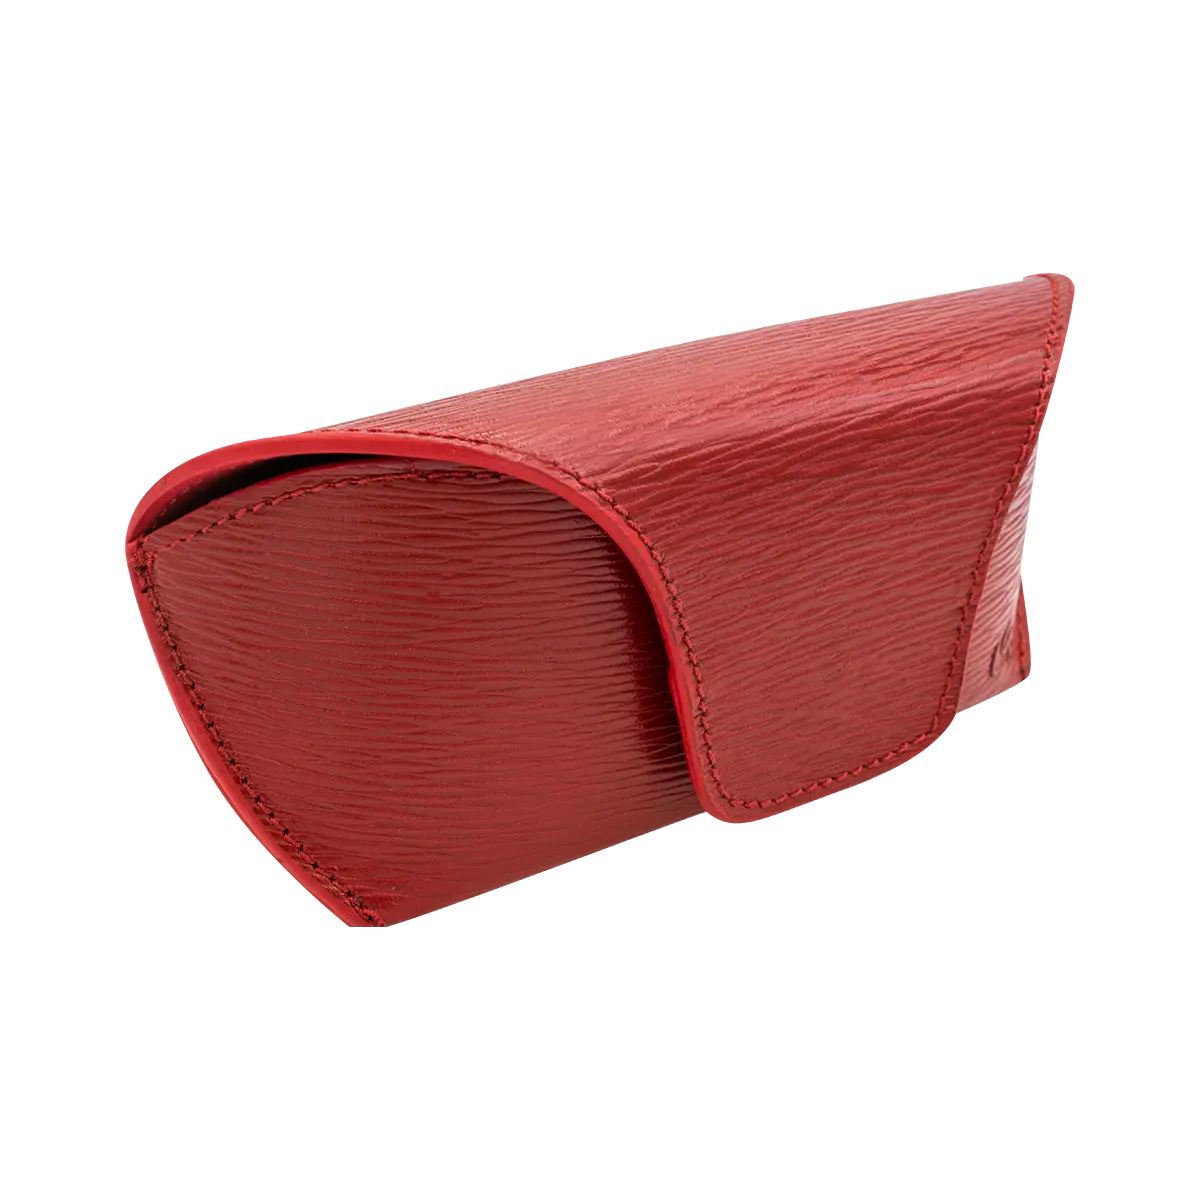 red leather sunglasses case for women. Shop now in San Diego, CA.